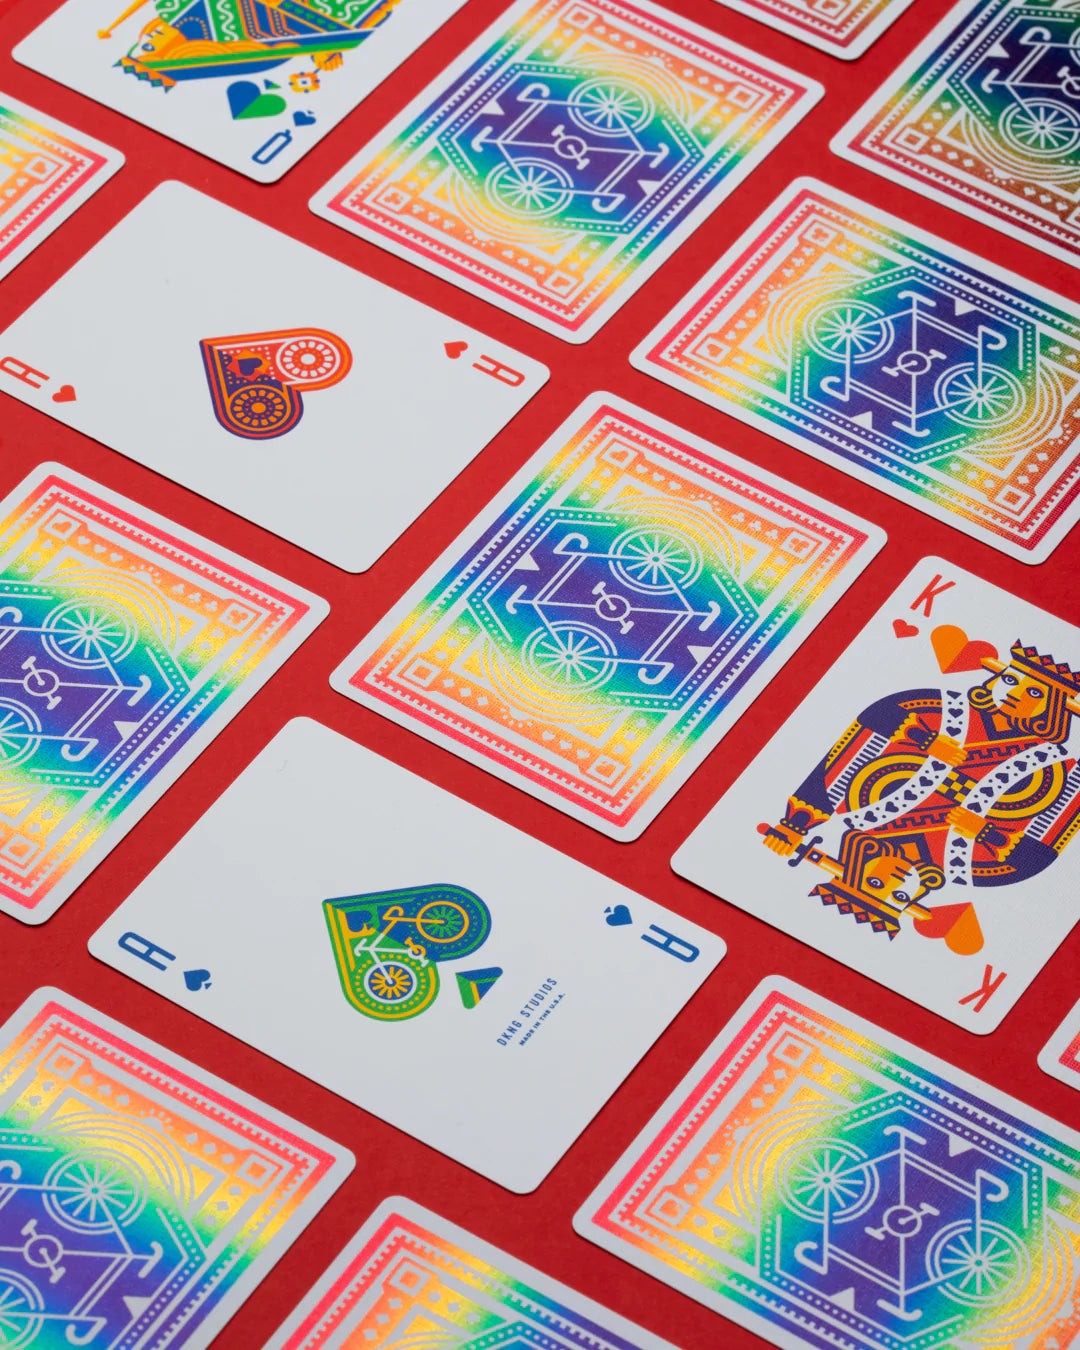 DKNG RAINBOW WHEELS PLAYING CARDS